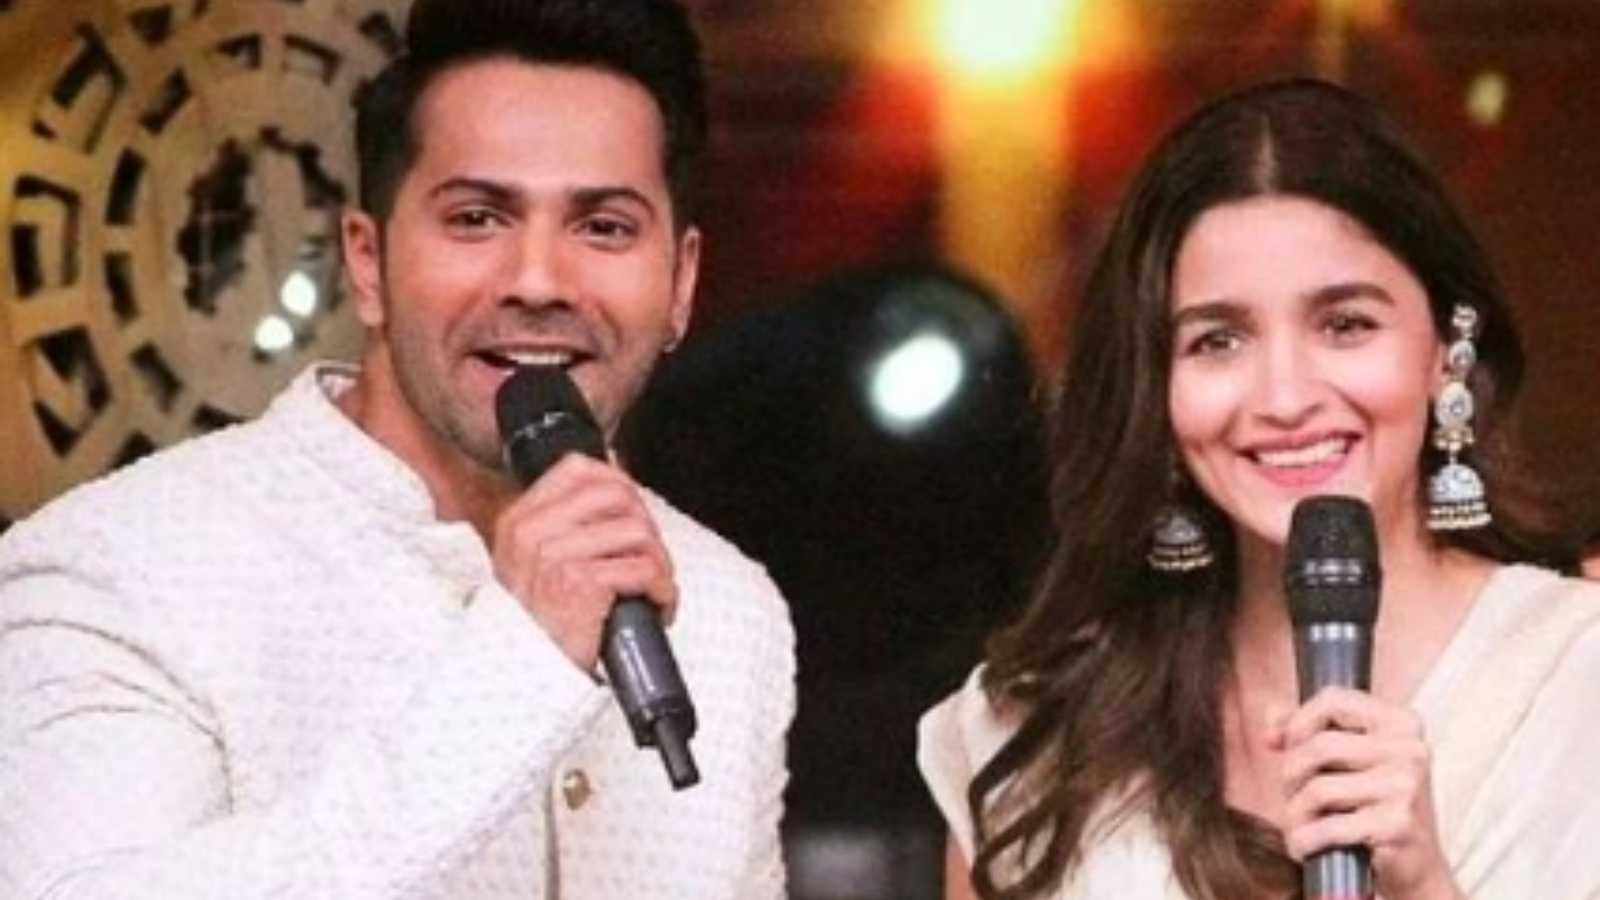 'Alia Bhatt gets more recognition on Koffee With Karan than Brahmastra' : Netizens react after Varun Dhawan praises the actress on the show